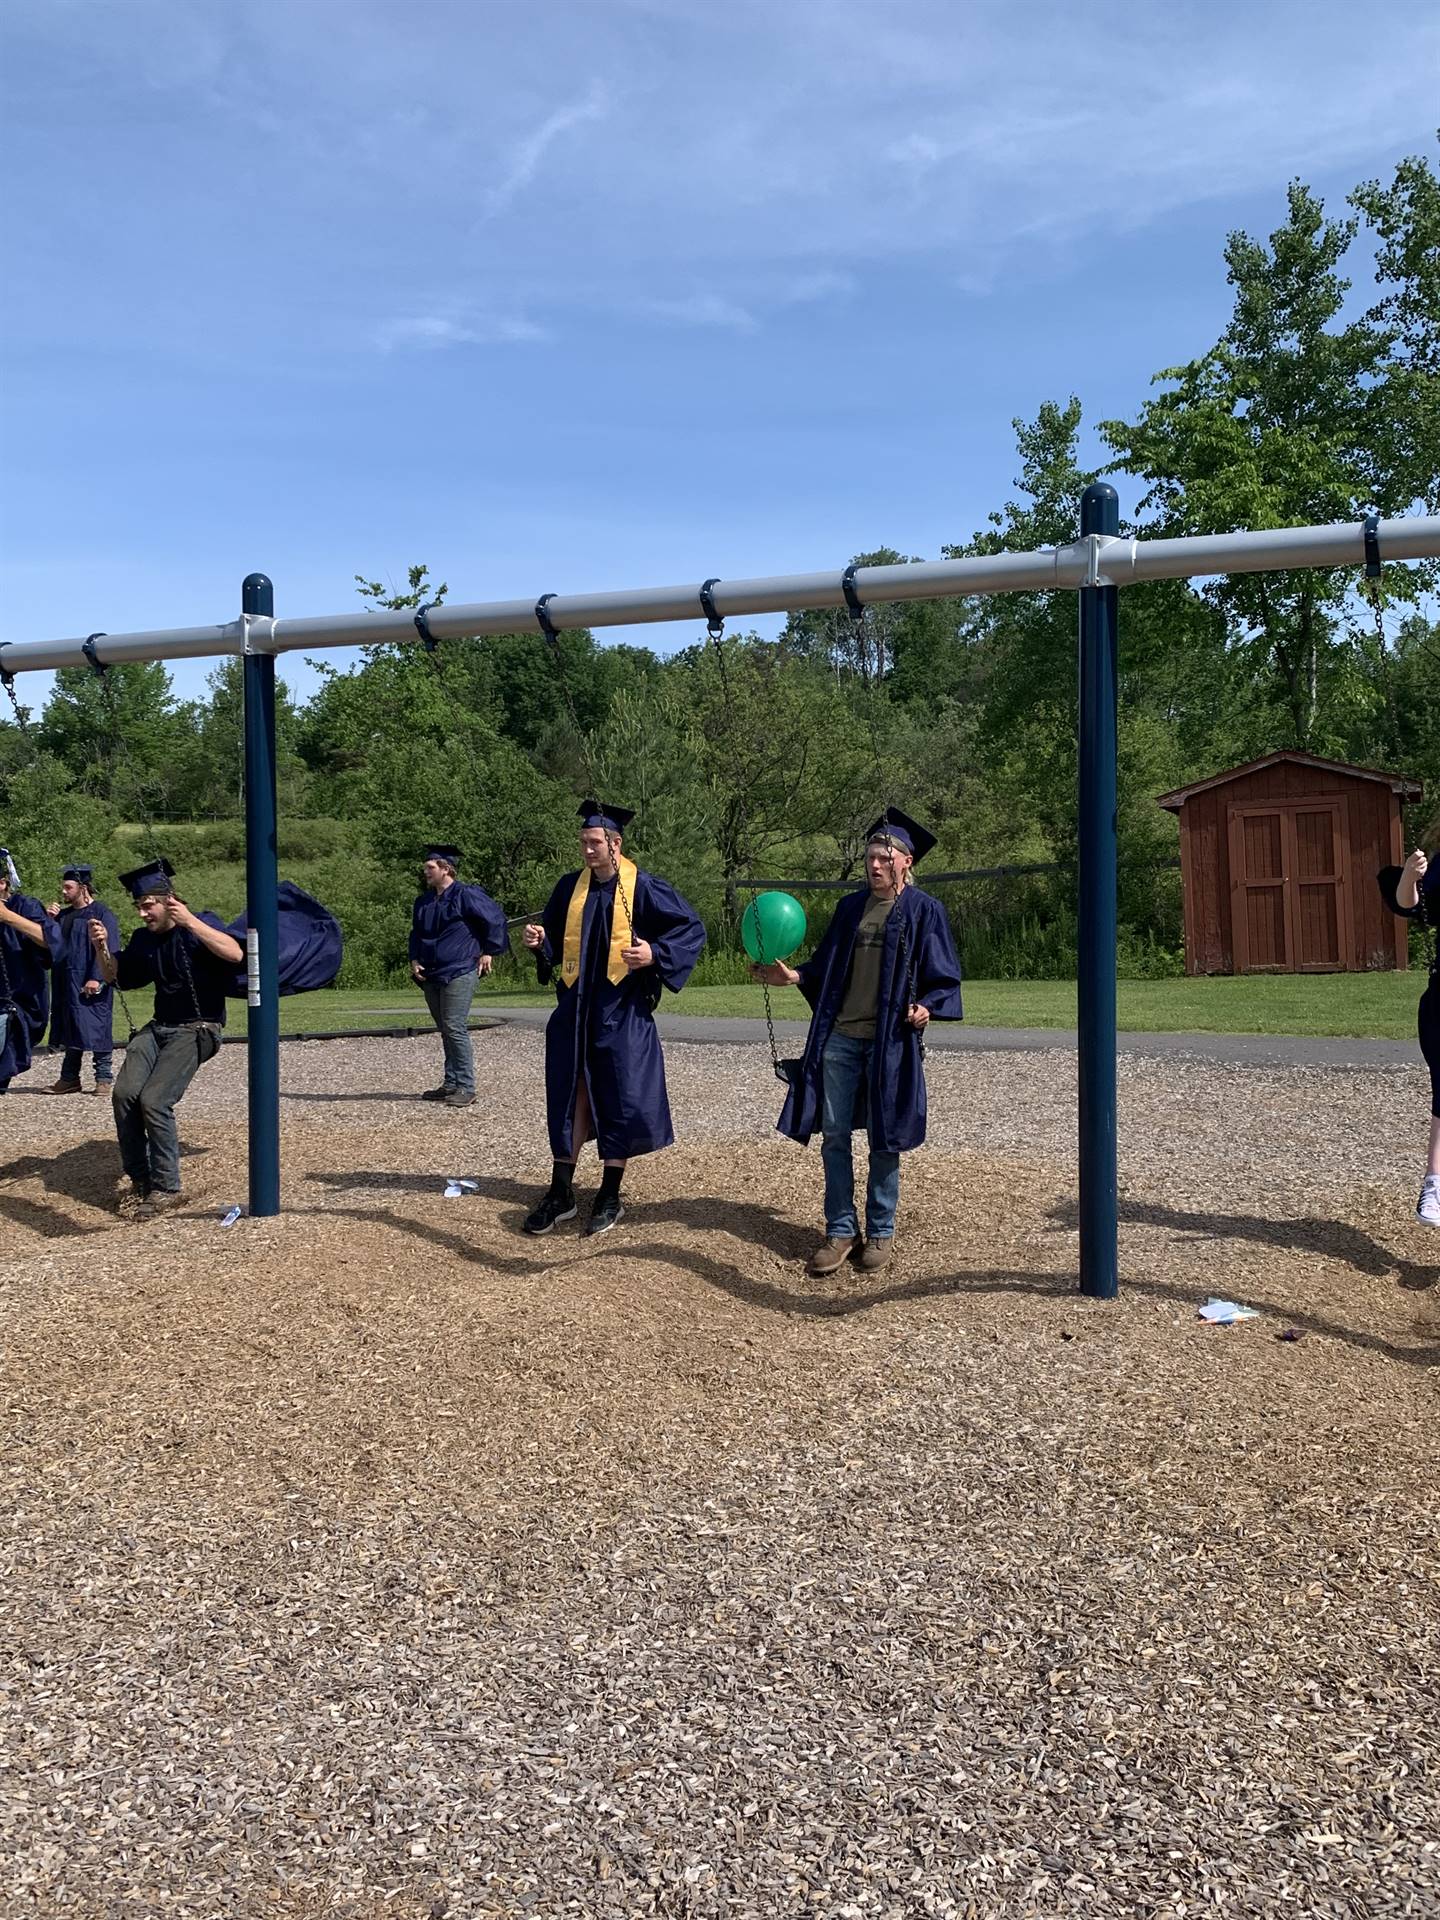 high school graduates in cap and gown swing on playground